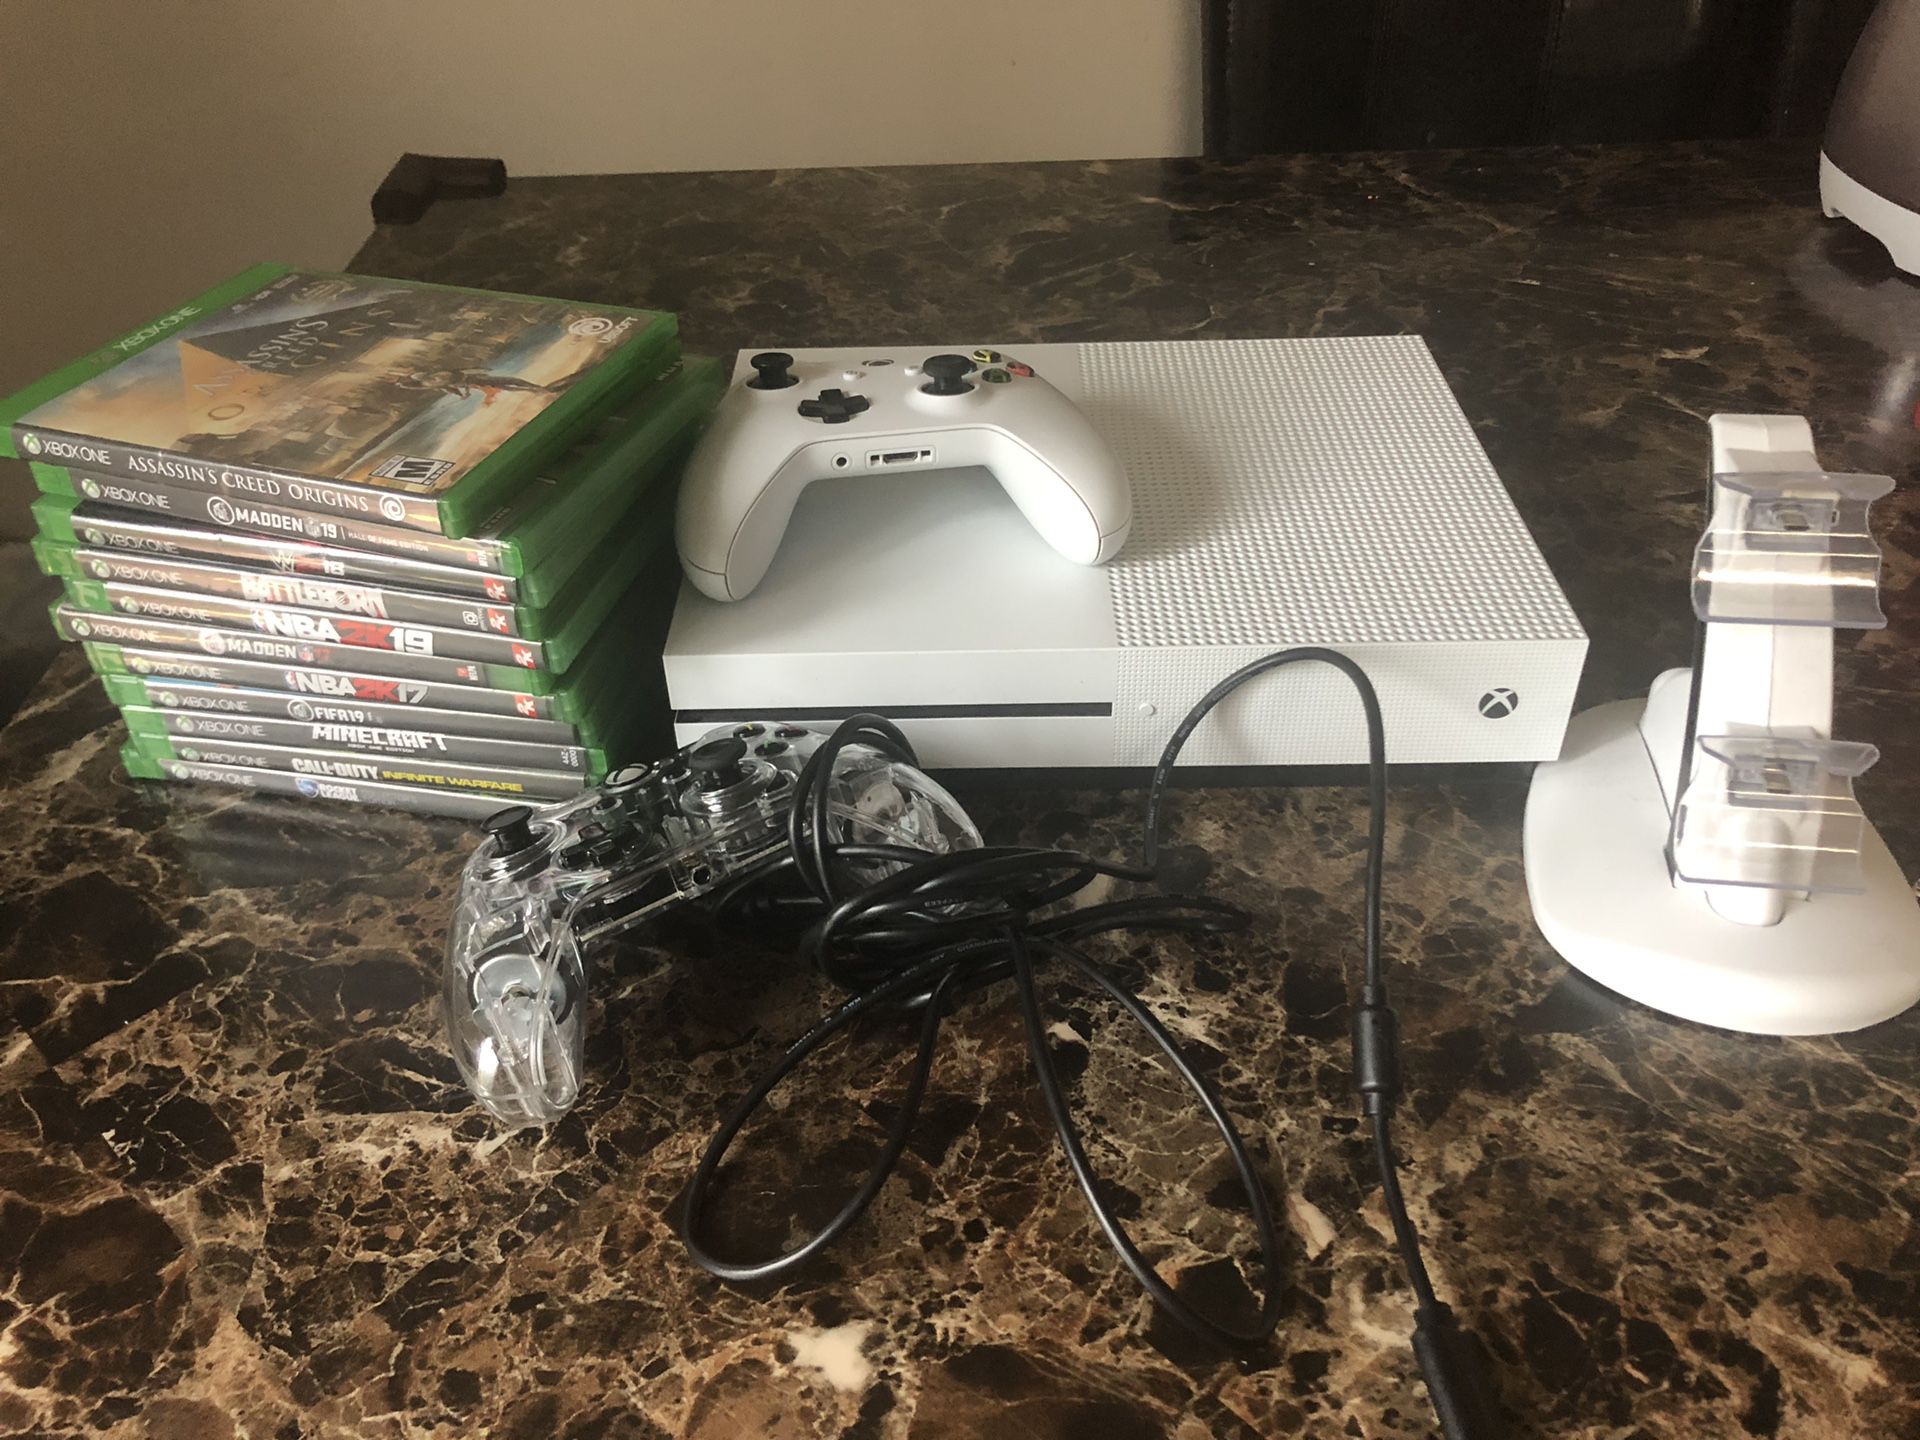 Xbox one with 11 games 2 controller and controller charger